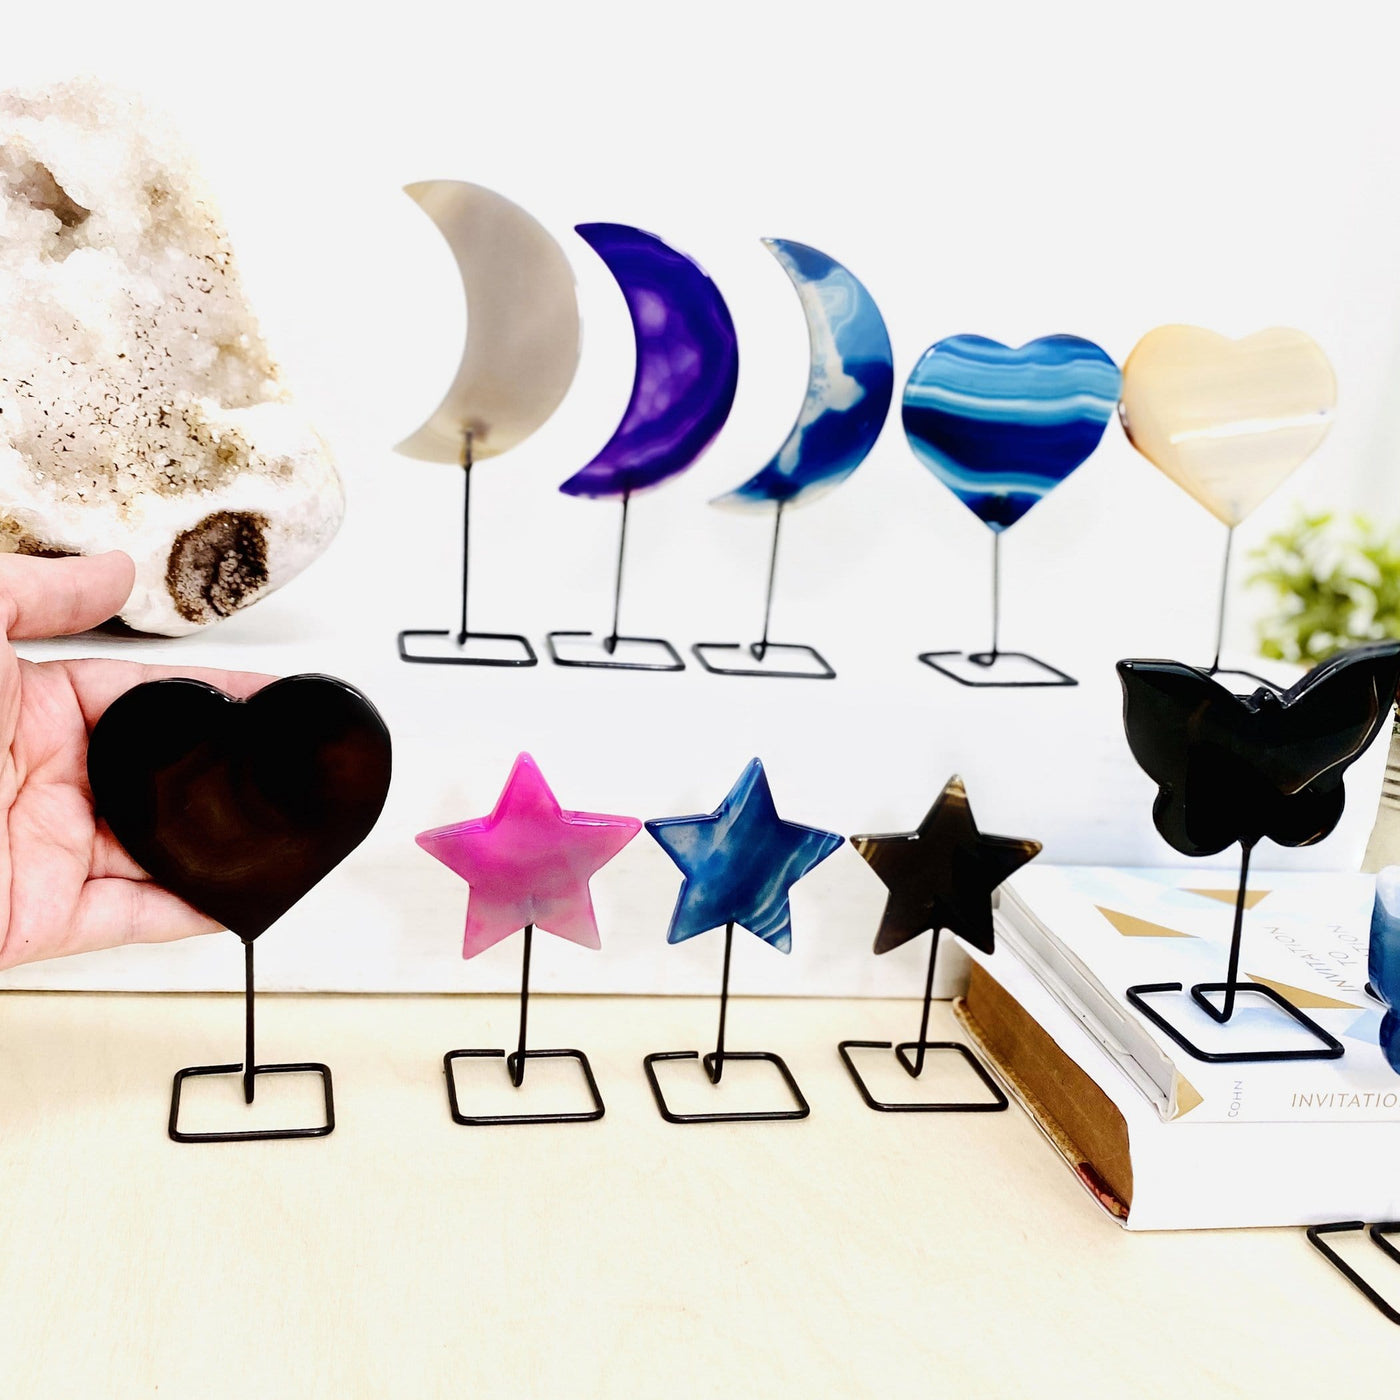 Picture of moons, hearts, stars and butterflies we have available.